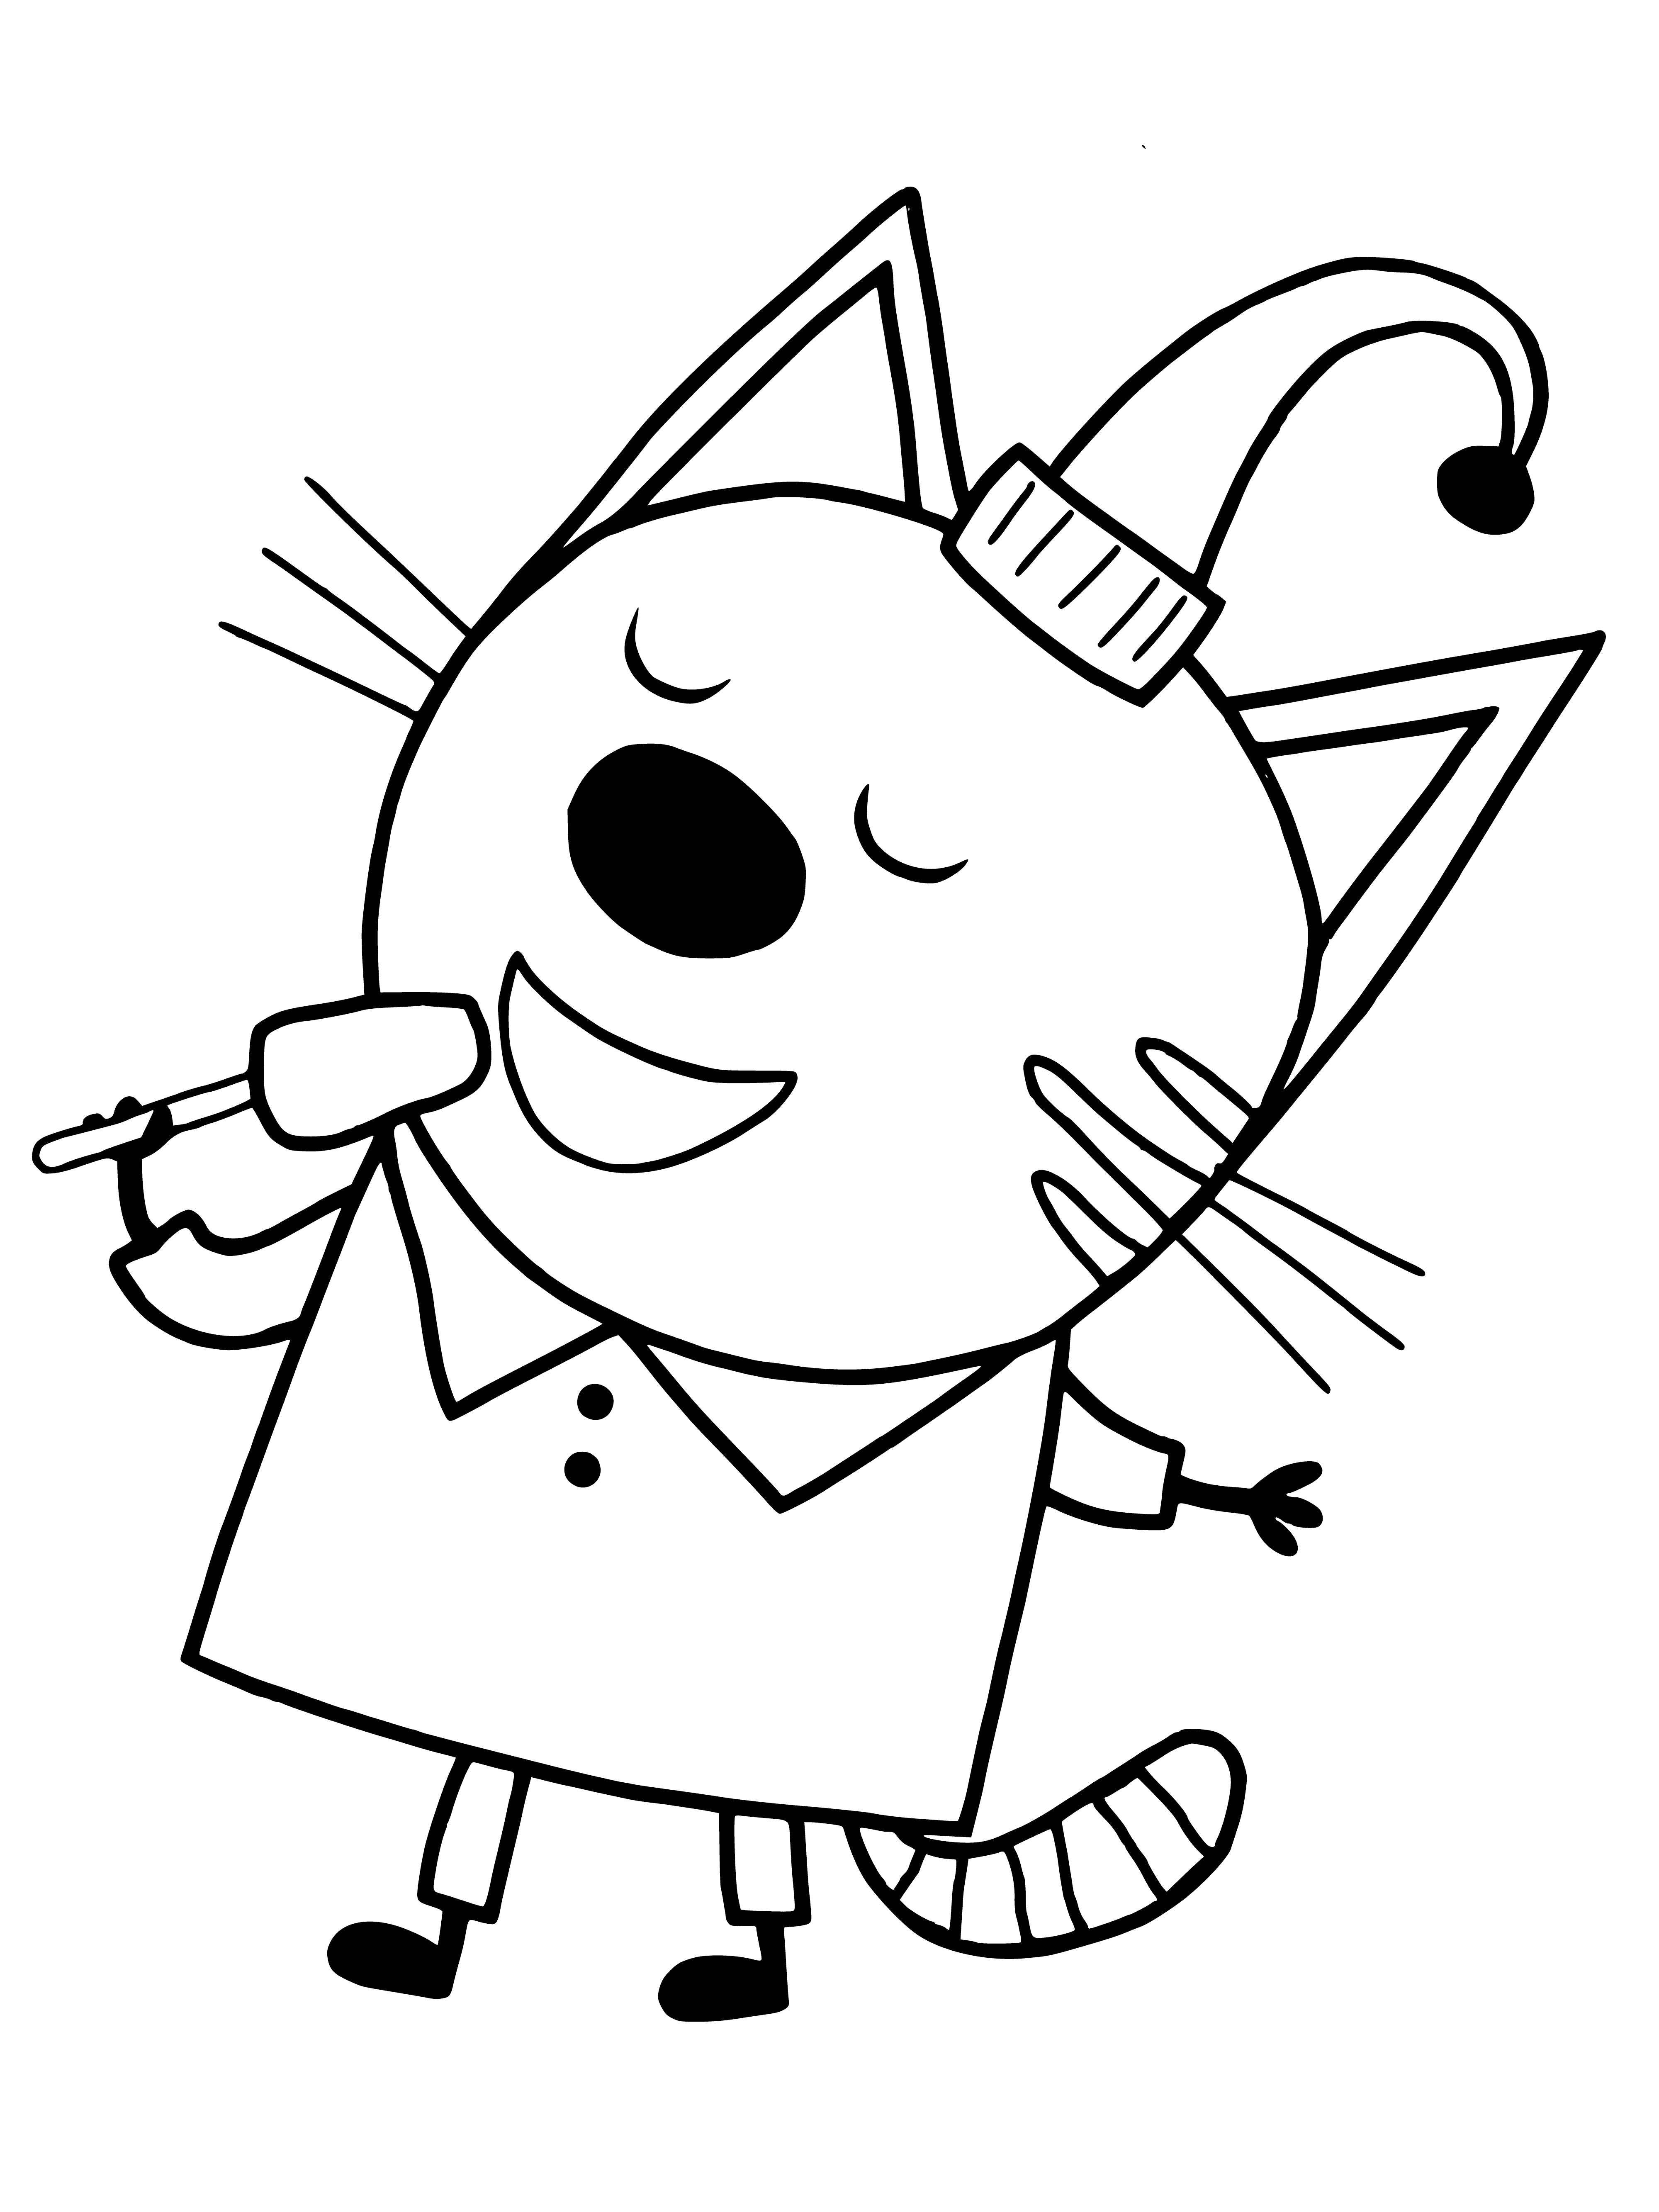 coloring page: Compote is a tabby who loves sweets, always begging for a bite of cake or ice cream! #cutecat